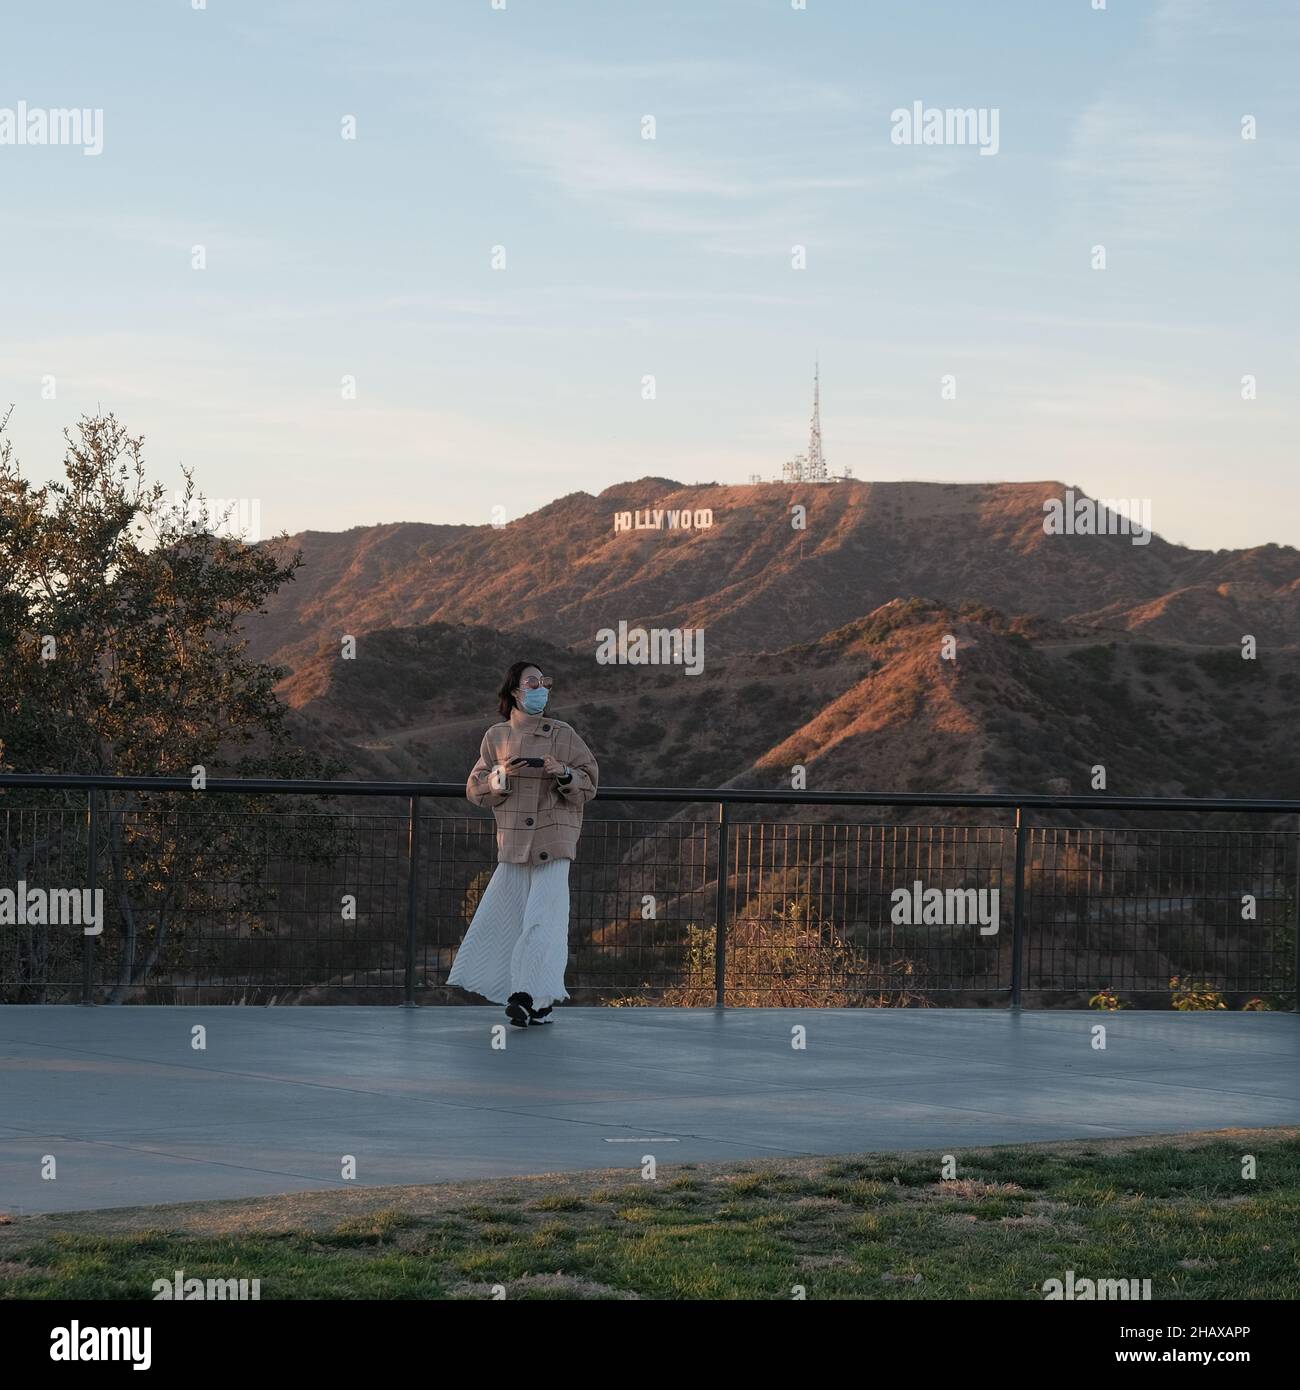 LOS ANGELES, UNITED STATES - Jun 12, 2019: A young female tourist leaning against a fence with the Hollywood Sign on Mount Lee in the background Stock Photo